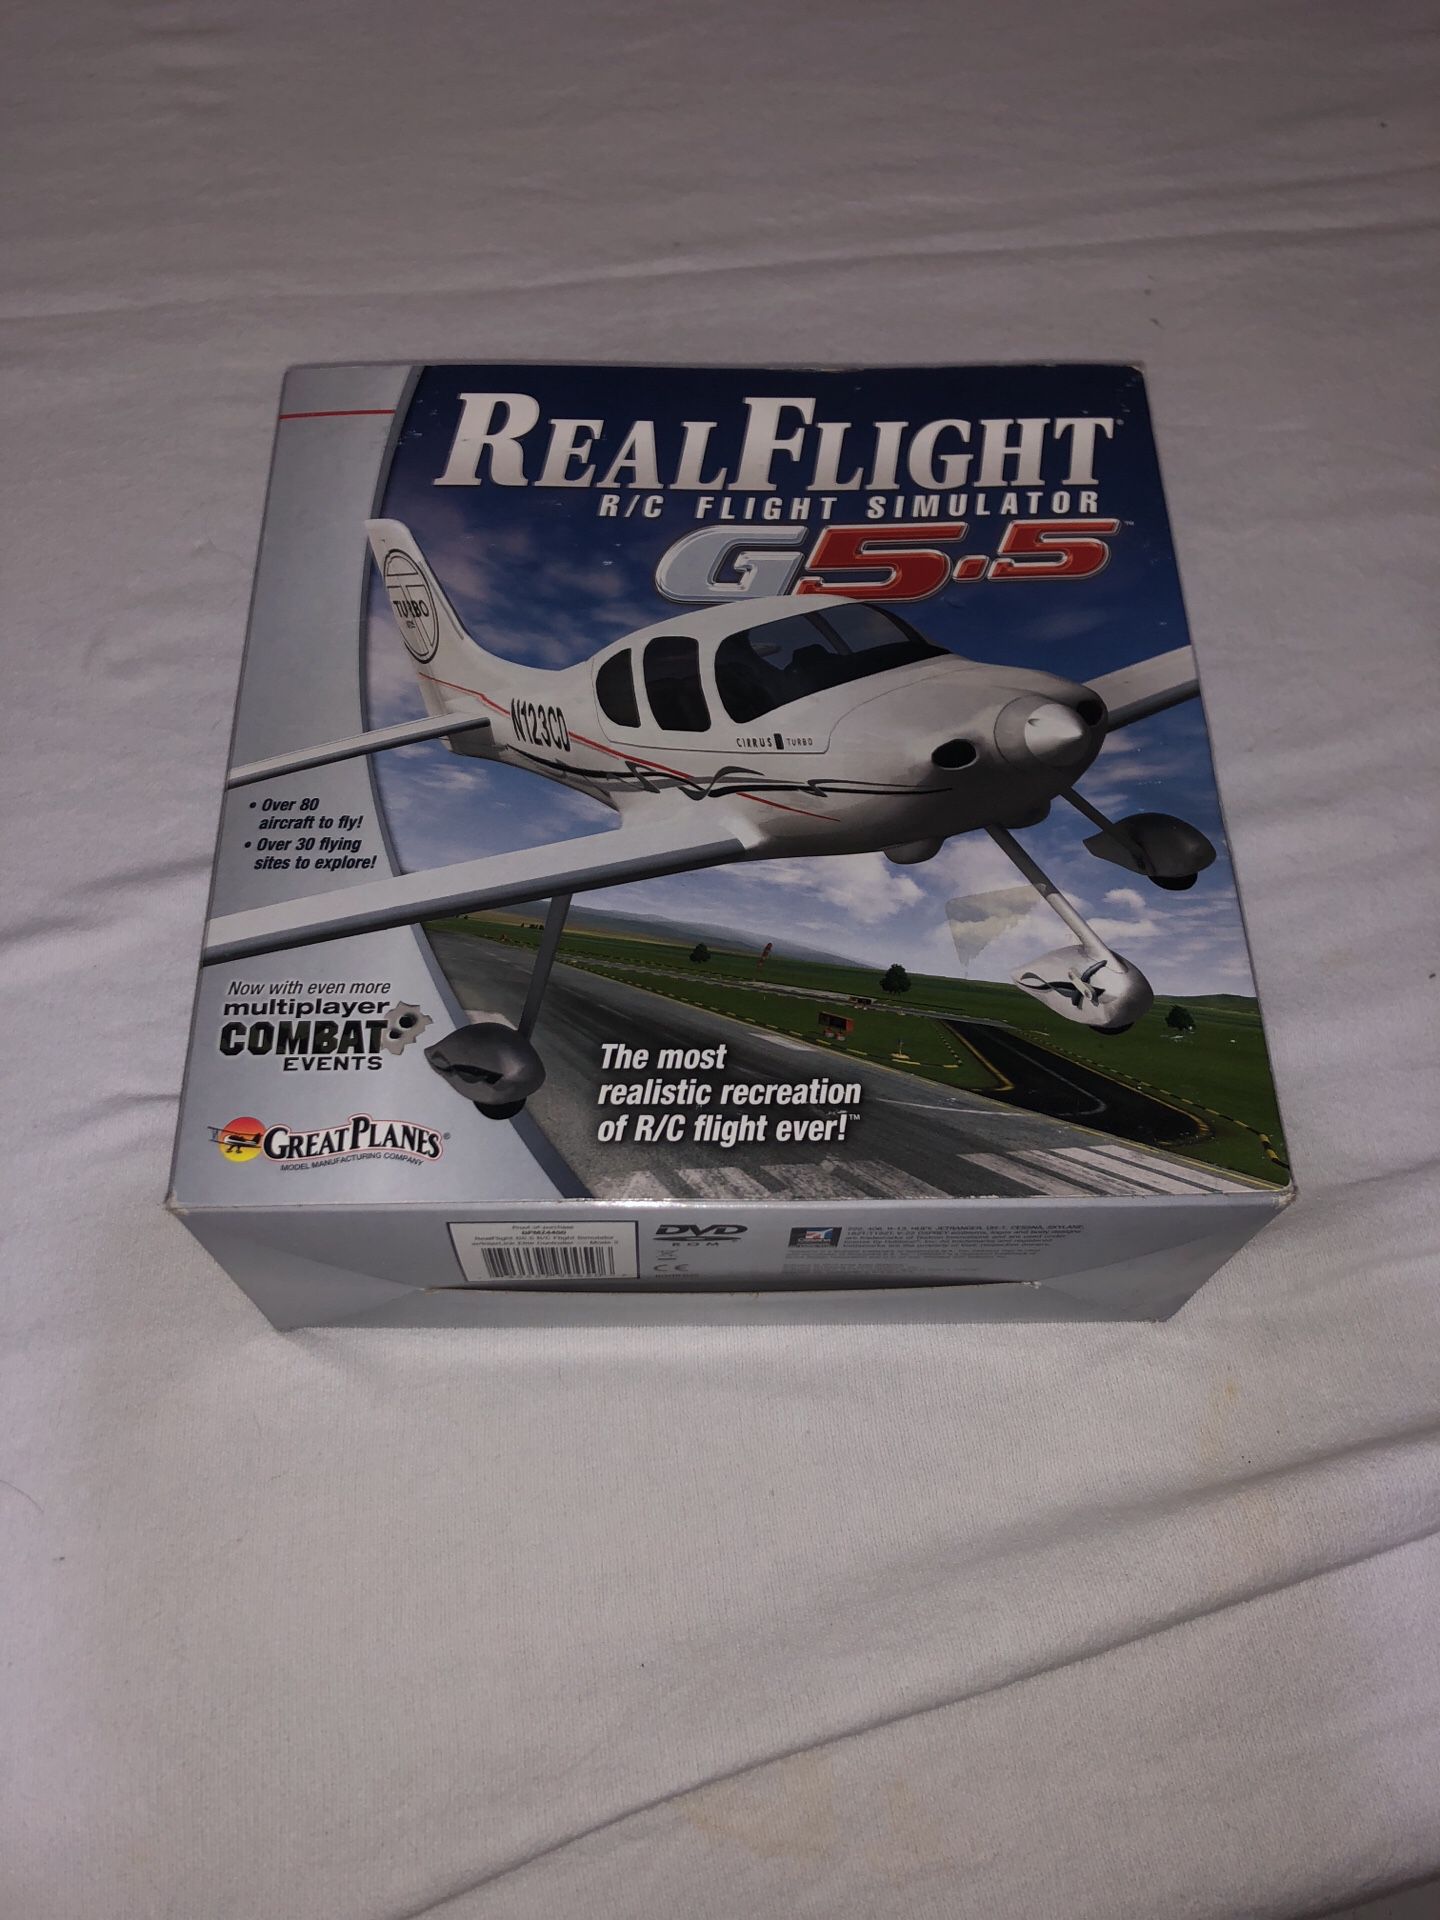 Real flight r/c flight simulator g5.5 I paid 200 used it only once it’s complete everything is new including the cd it’s for pc they sell for